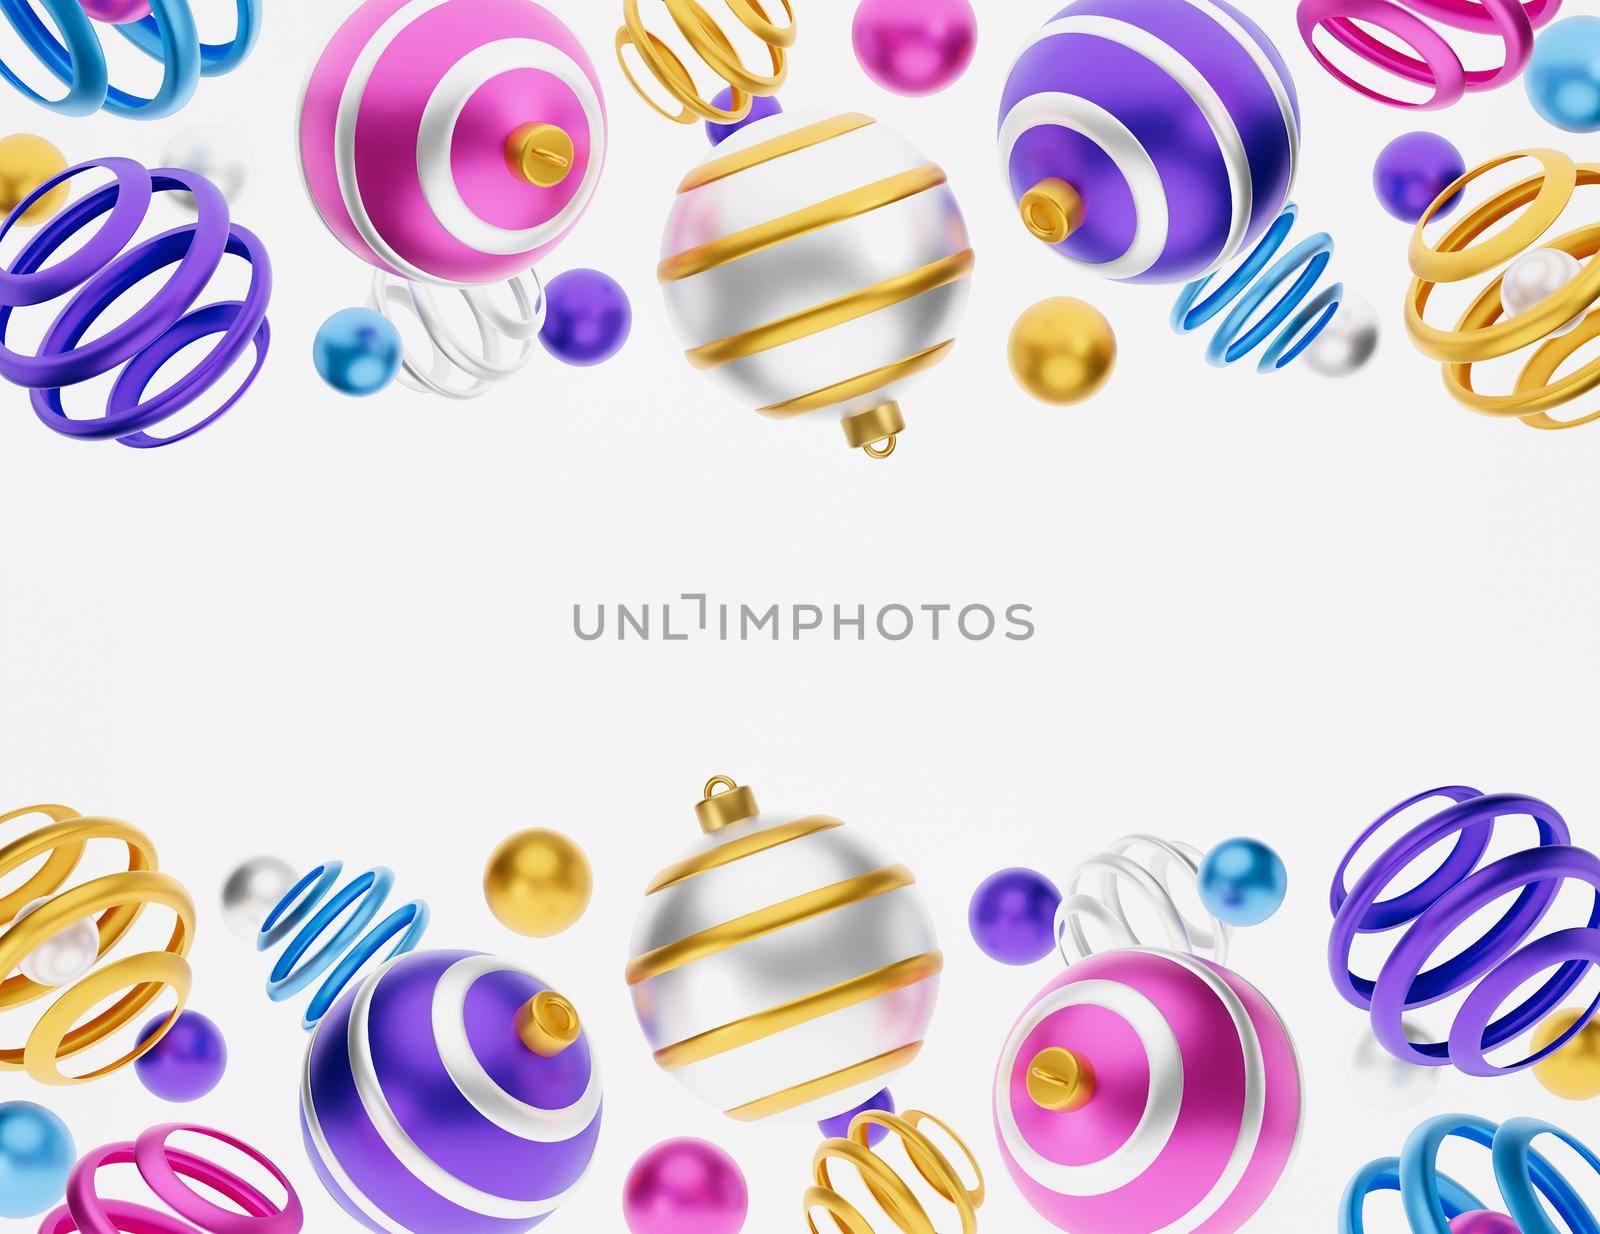 Merry christmas 3d greeting card or illustration banner. Merry Christmas and Happy New Year 3d render illustration card with ornate pink, blue, yellow xmas balls. Winter decoration xmas minimal design